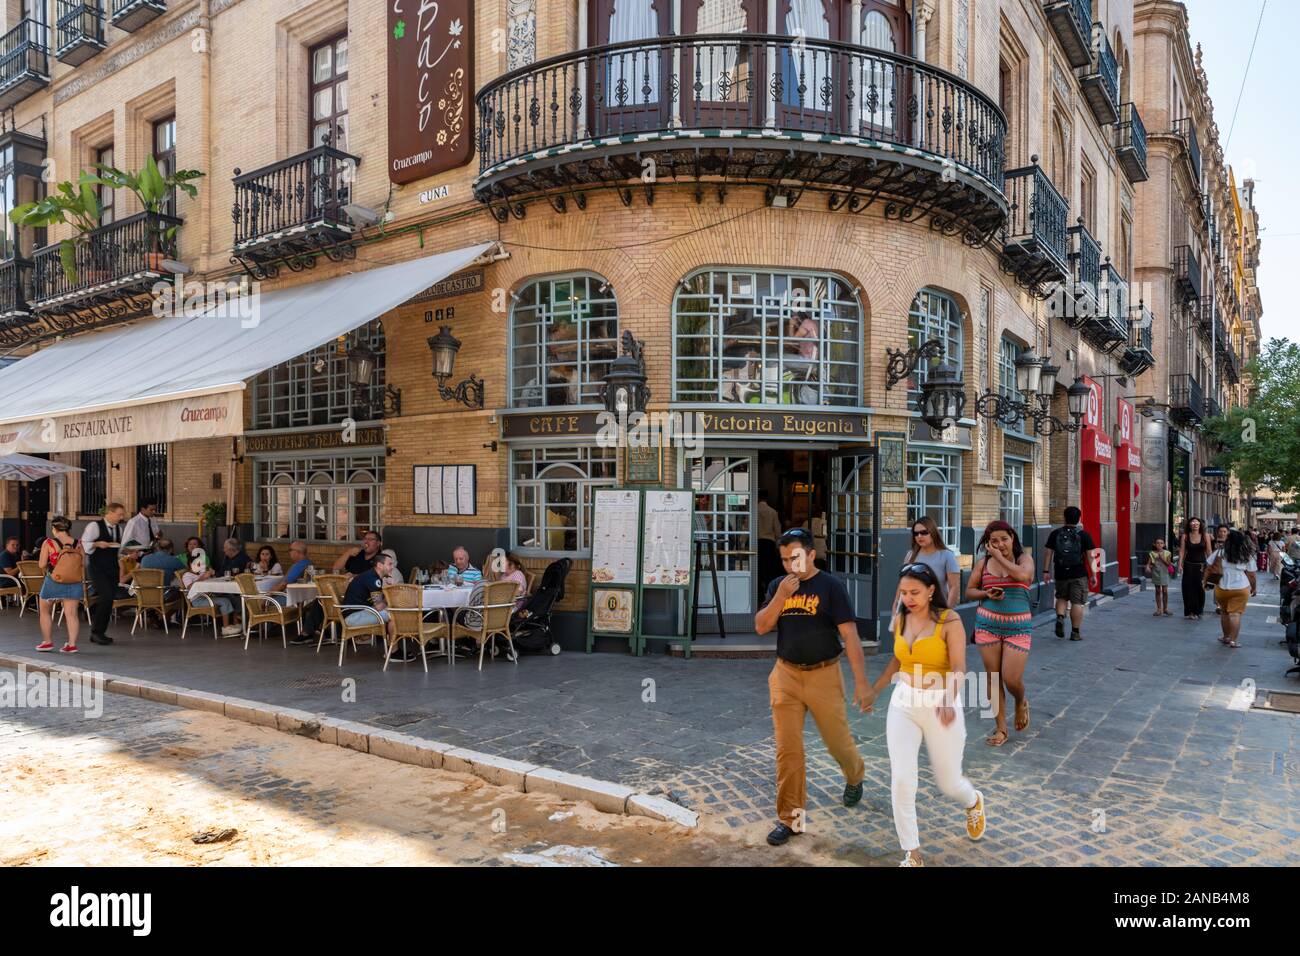 People enjoying a sunny October afternoon at the historic Victoria Eugenia cafe and restaurant at Plaza Villasis in Seville Stock Photo